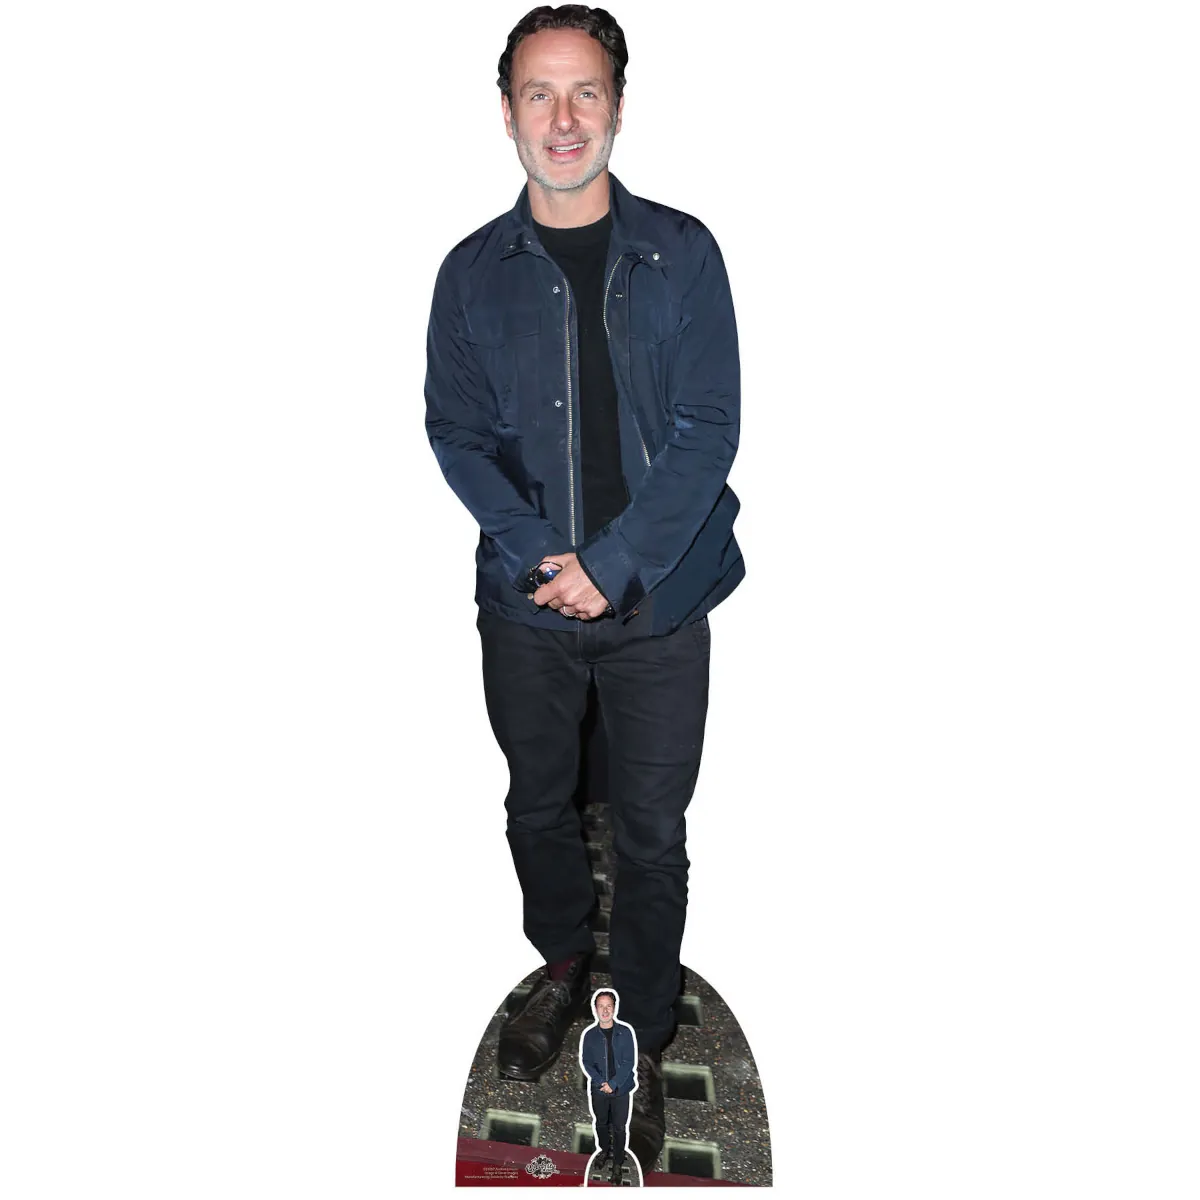 CS1057 Andrew Lincoln 'Blue Jacket' (English Actor) Lifesize + Mini Cardboard Cutout Standee Front